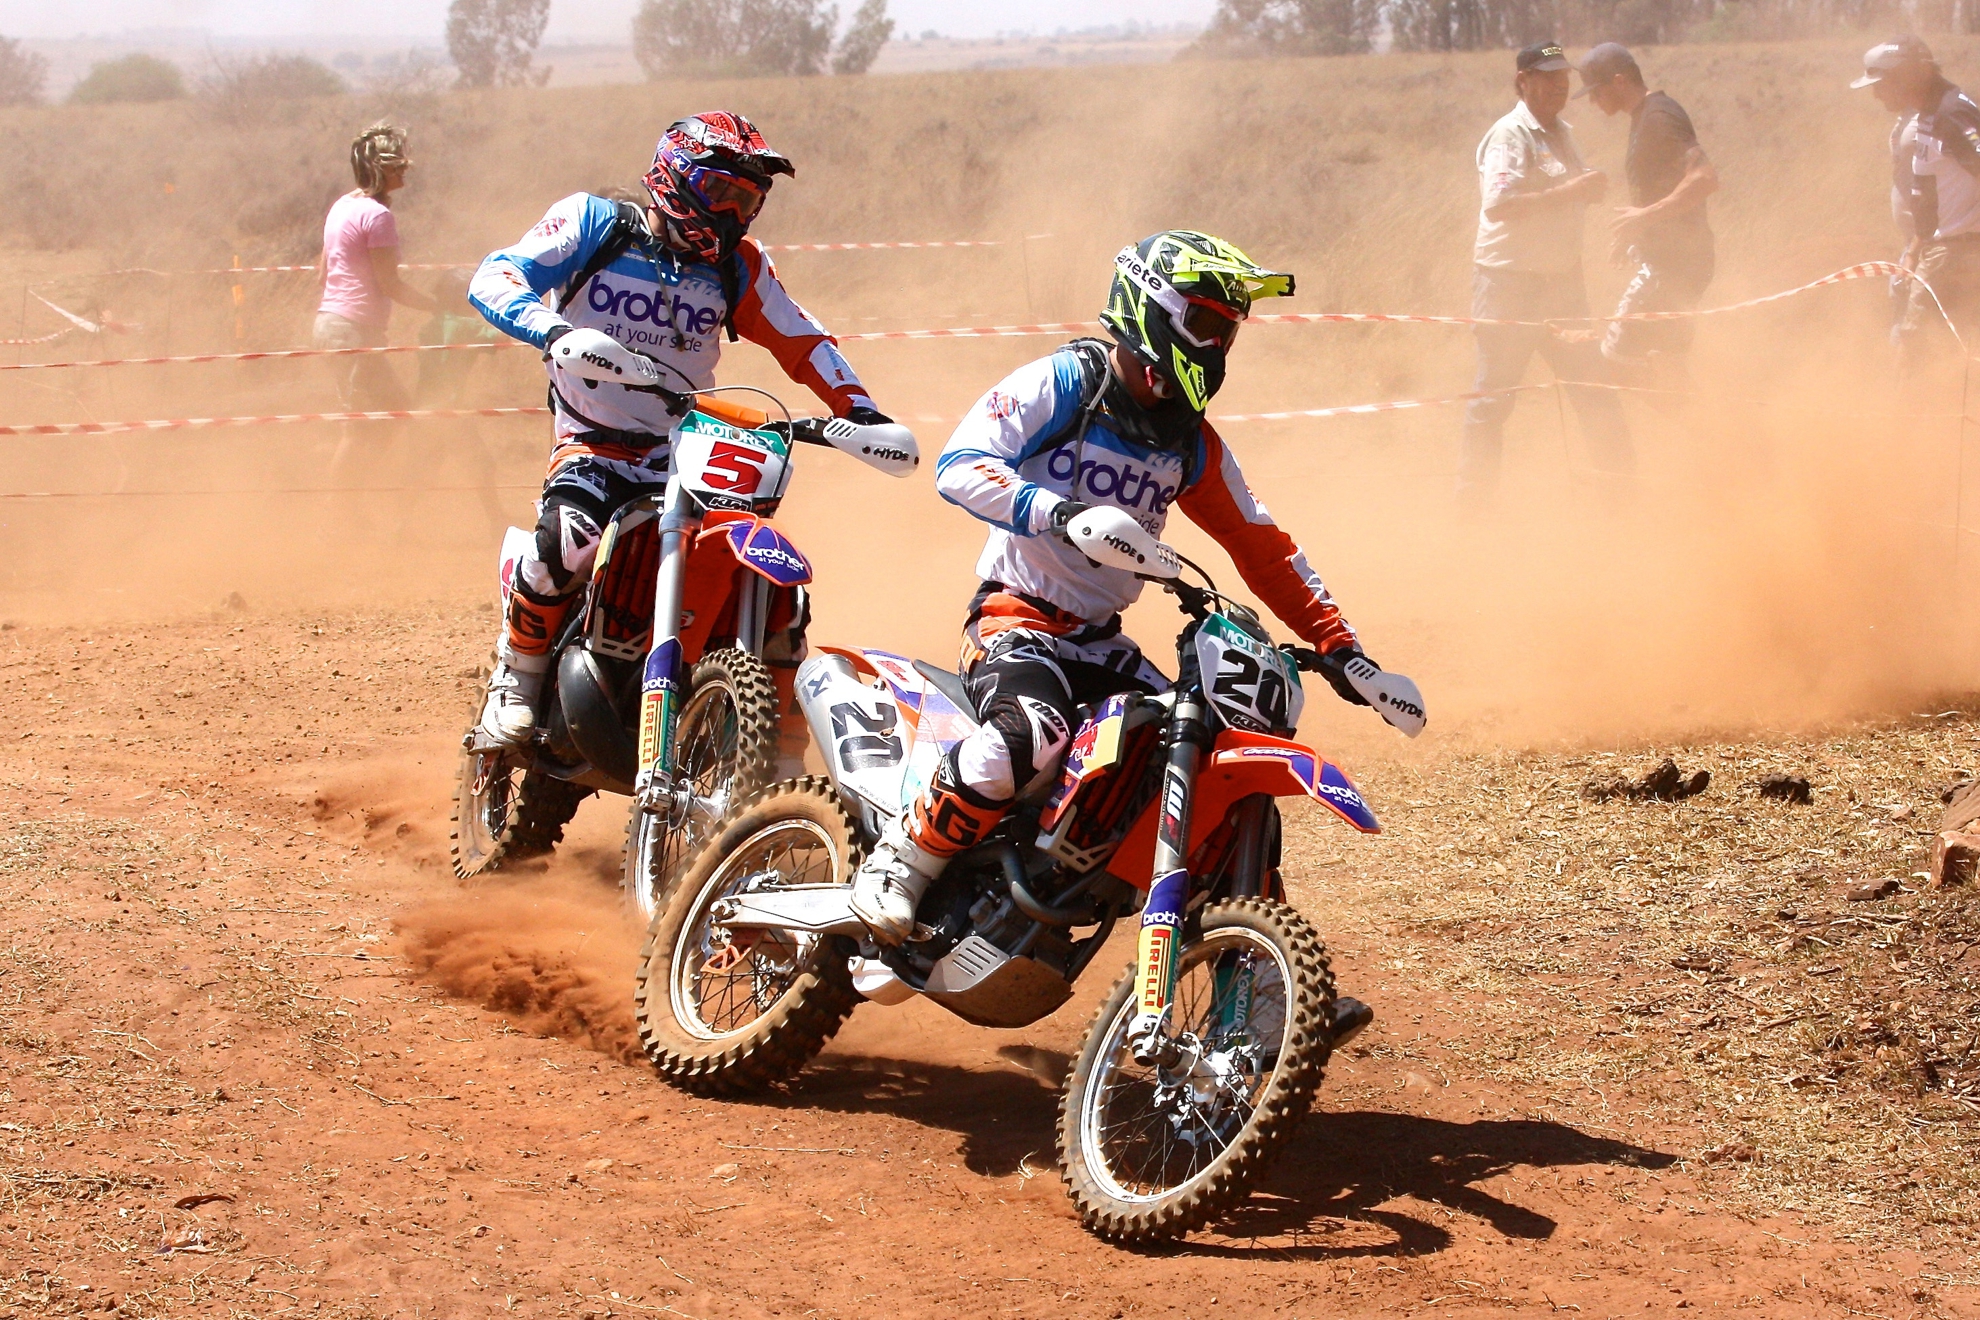 NATIONAL OFFROAD CHAMPIONSHIP KTM MOTORCYCLES DOMINATE